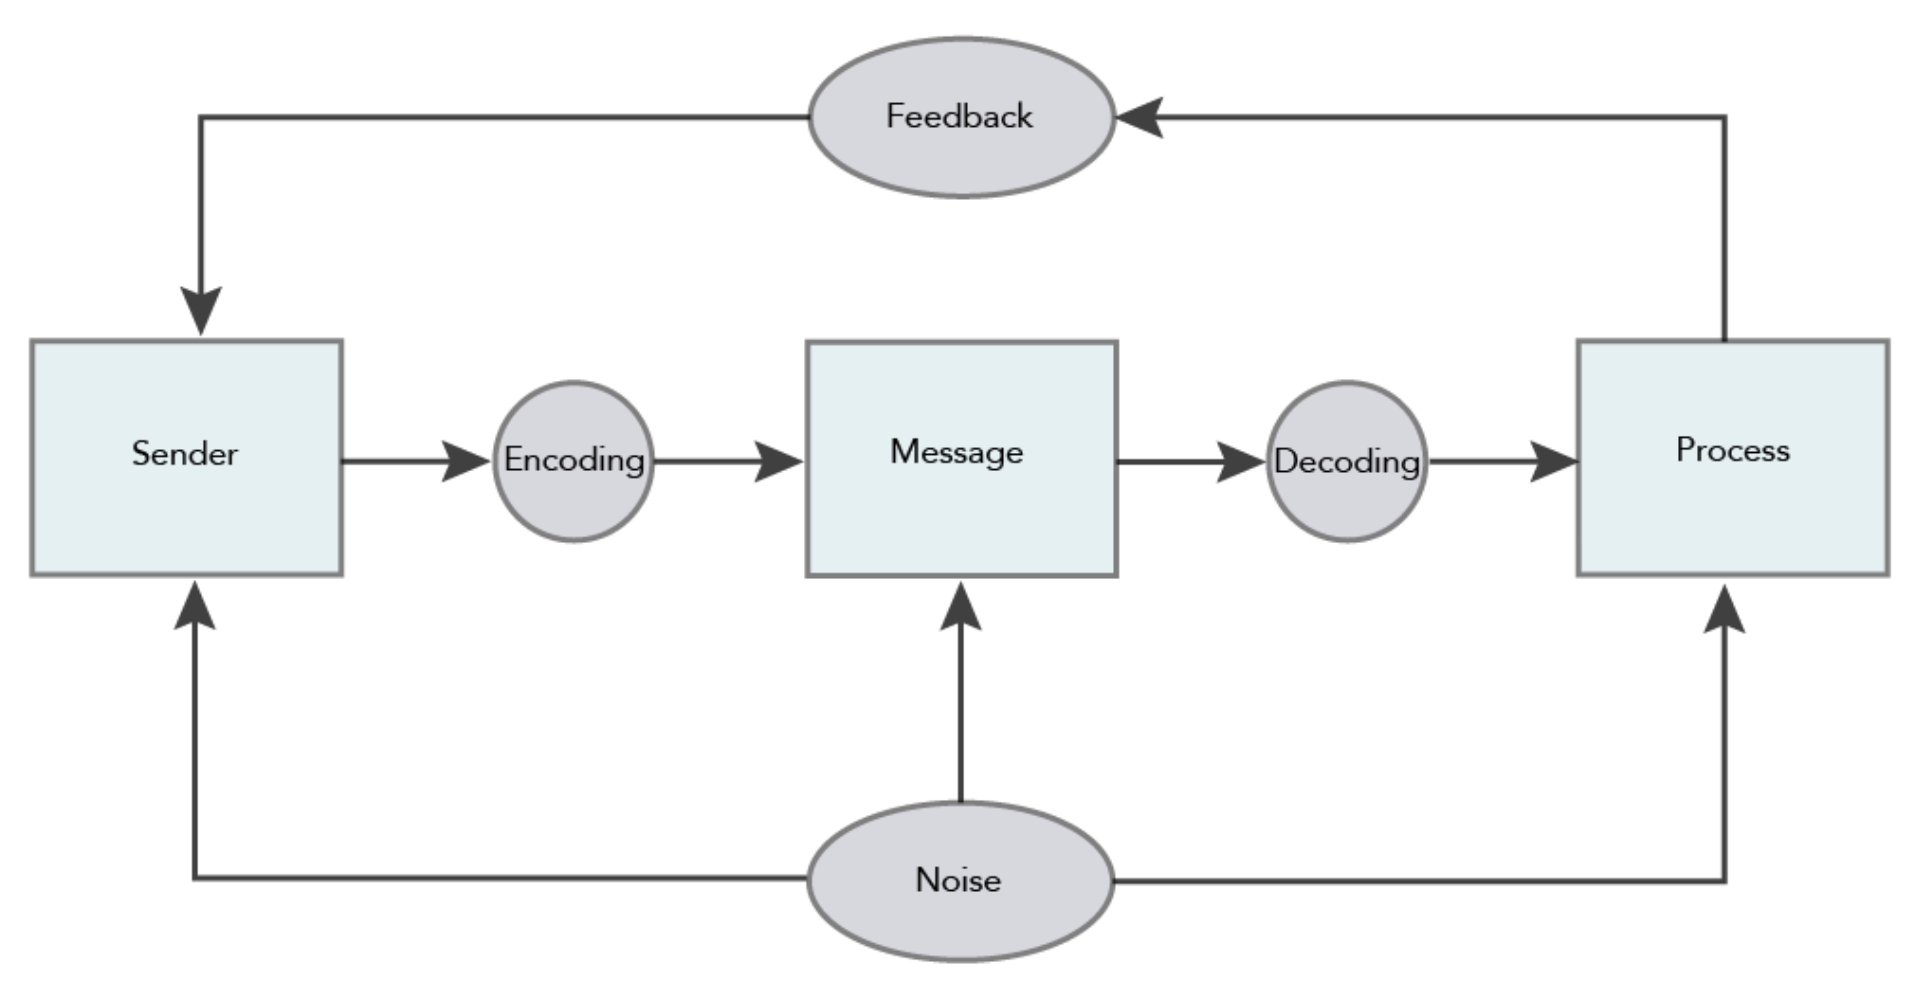 A flowchart of the social communication model, this time with "feedback" flowing from the "process" step and into the "sender" step.